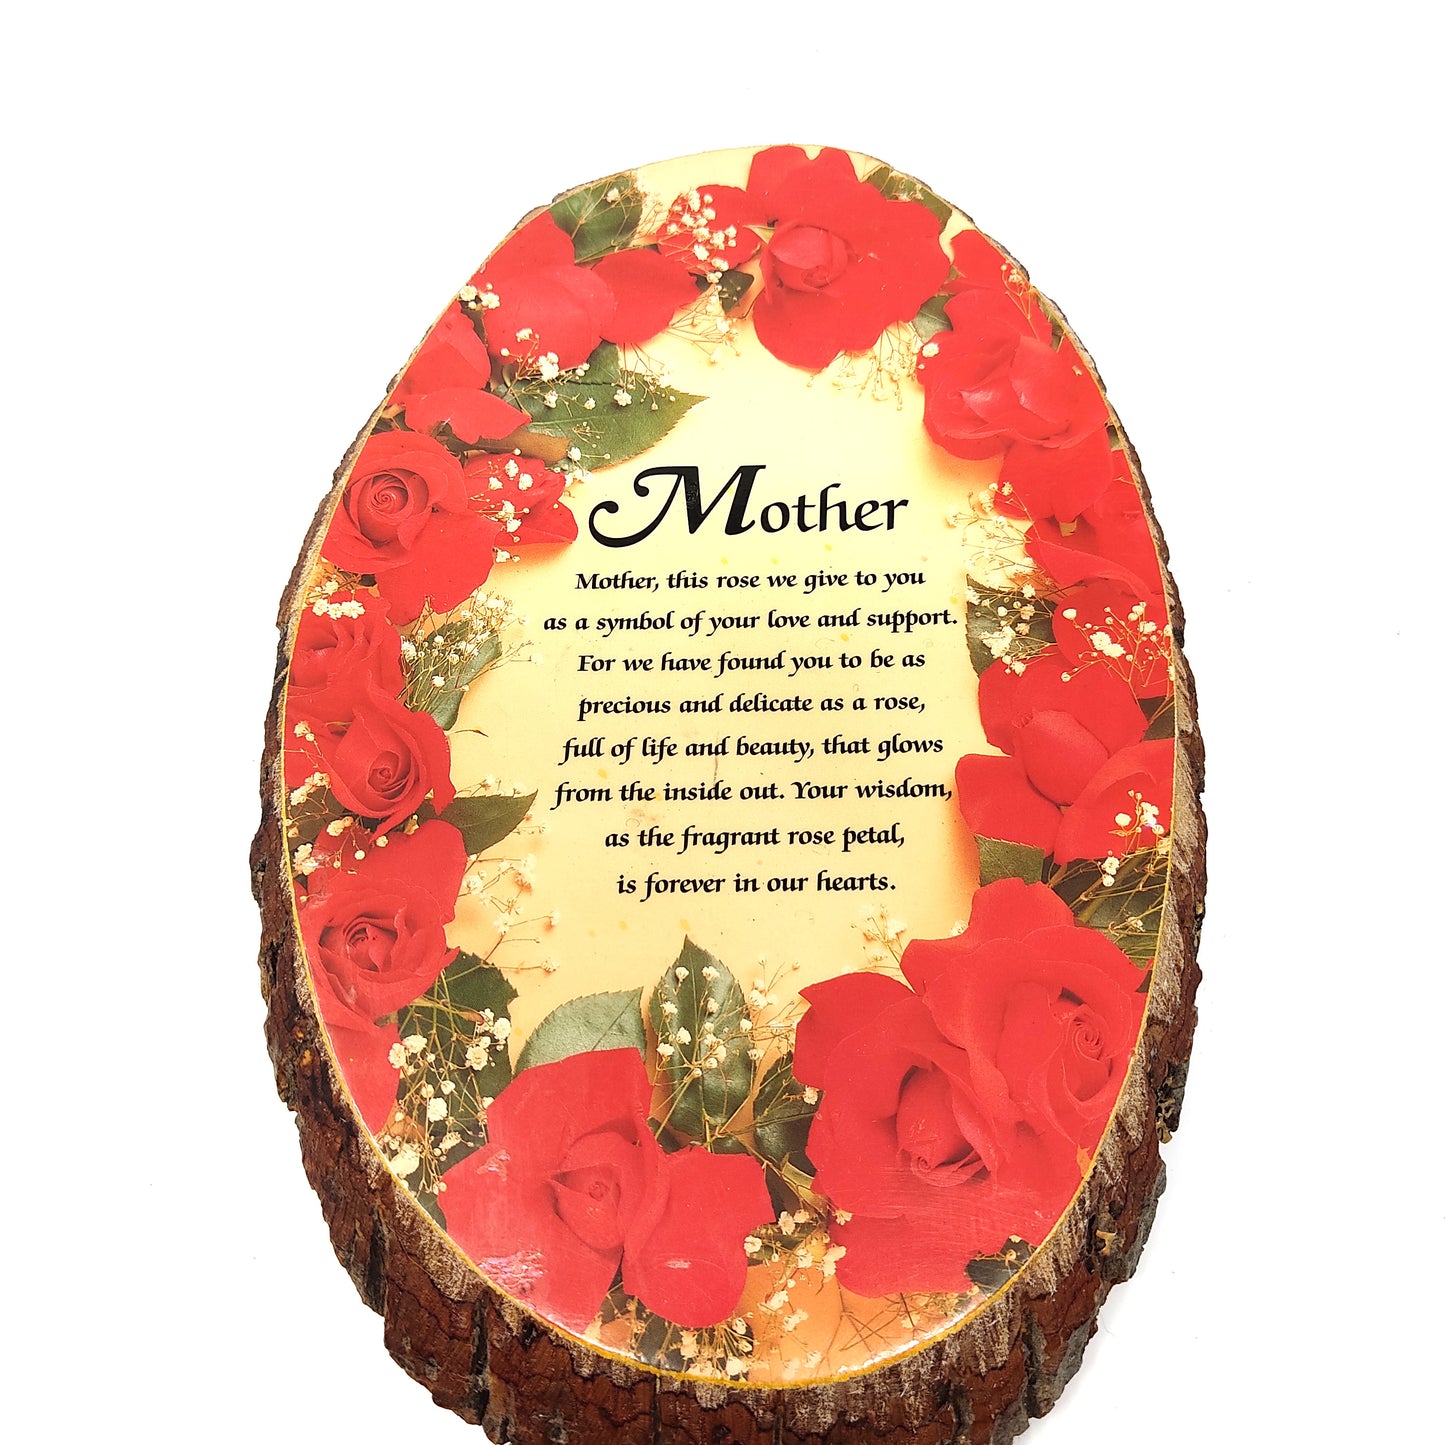 Natural Wood Slab Tree Bark Plaque Wall Hanging Mother Roses Decorative 10" Tall